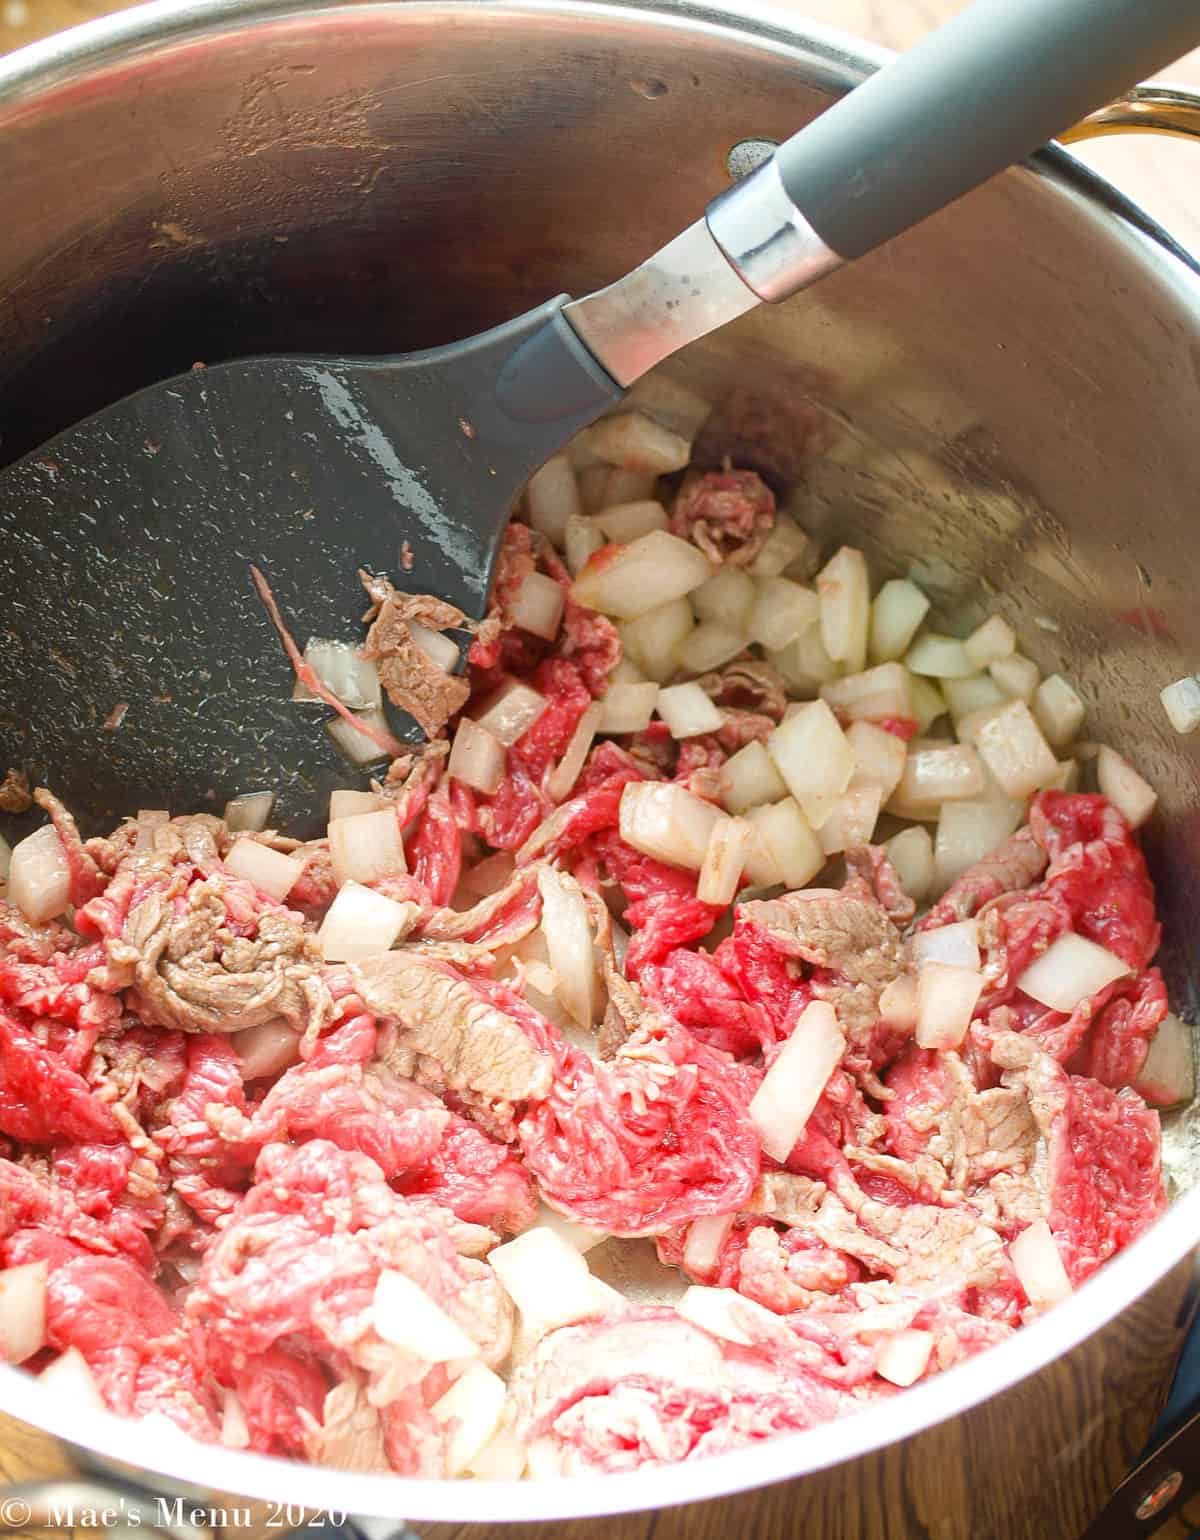 Sauteing the steak and onions in a dutch oven